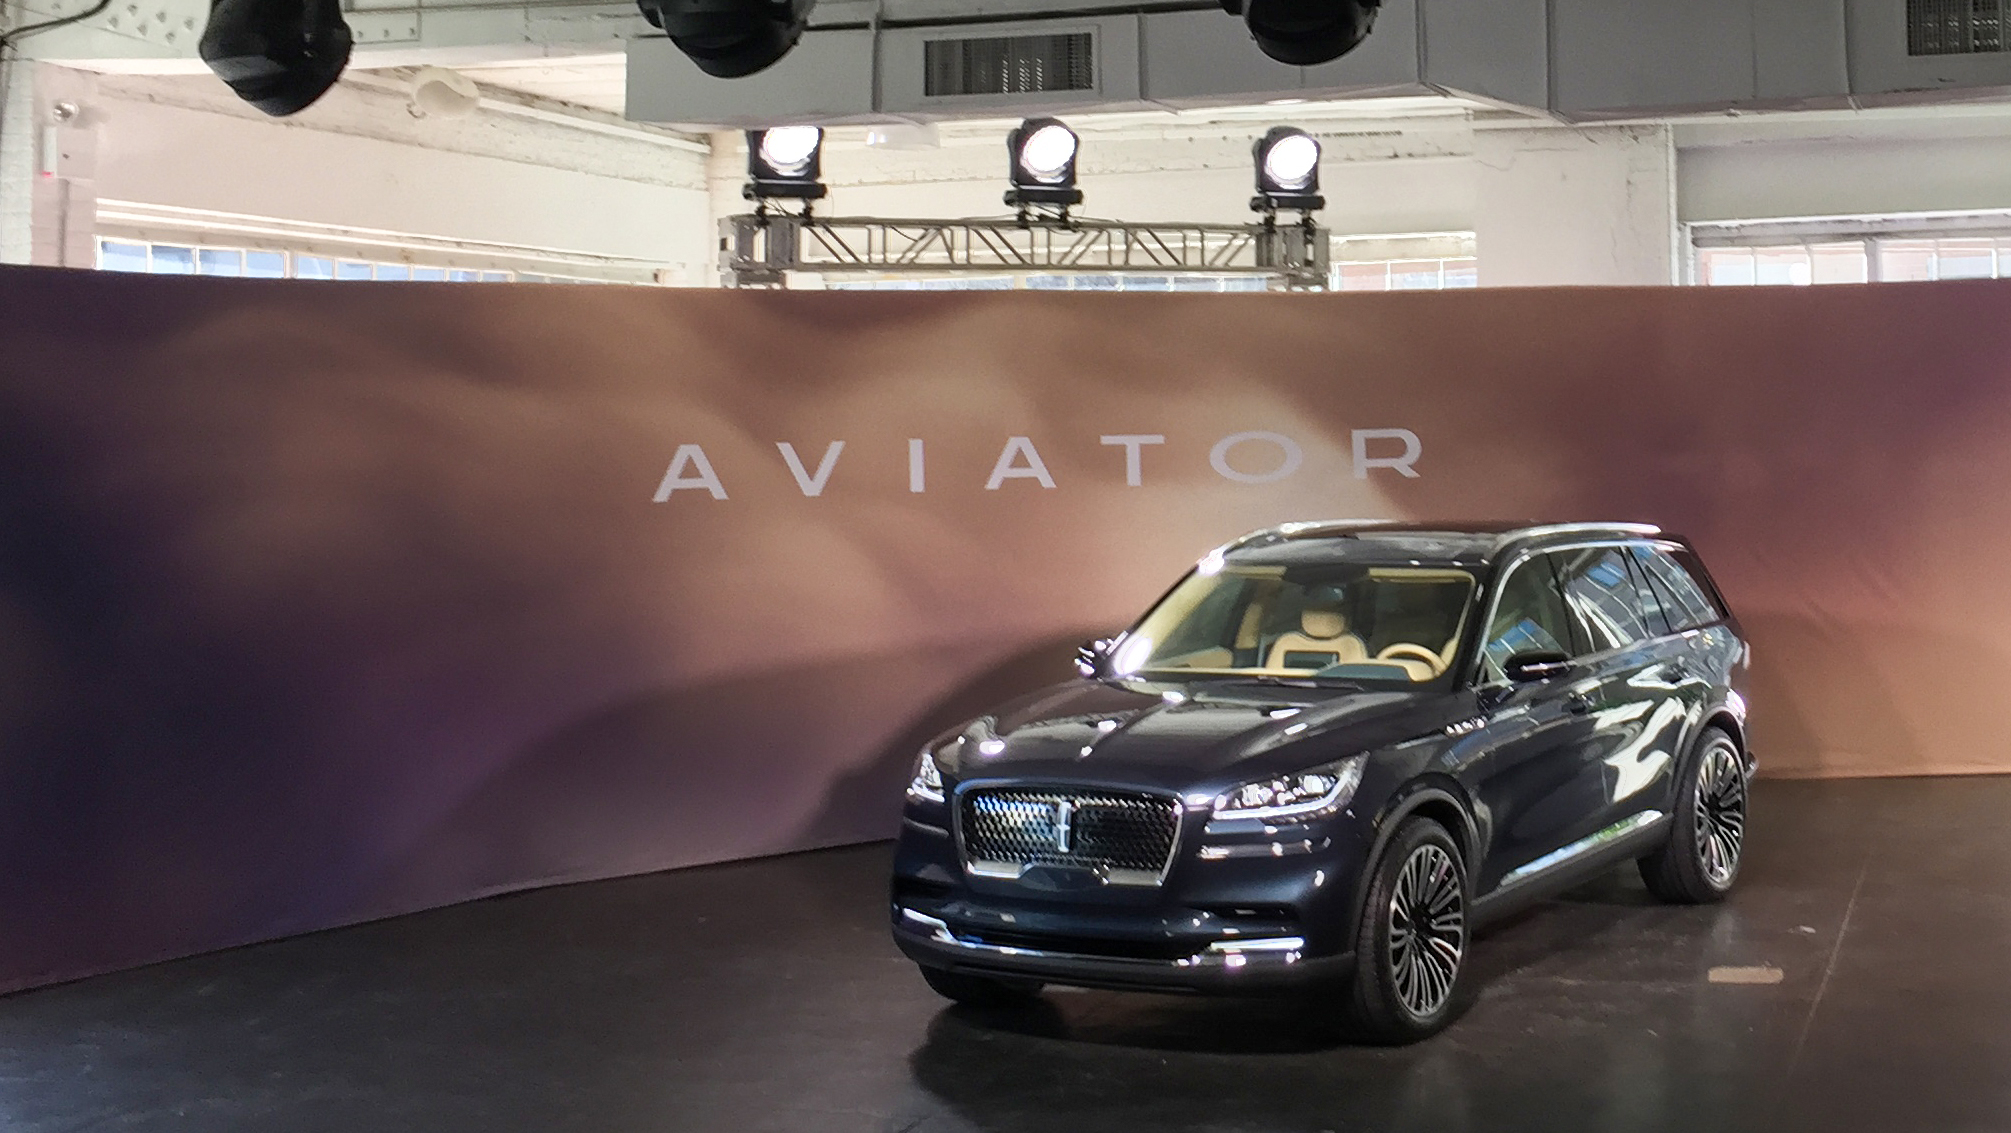 Lincoln Takes Flight With The Introduction of Aviator